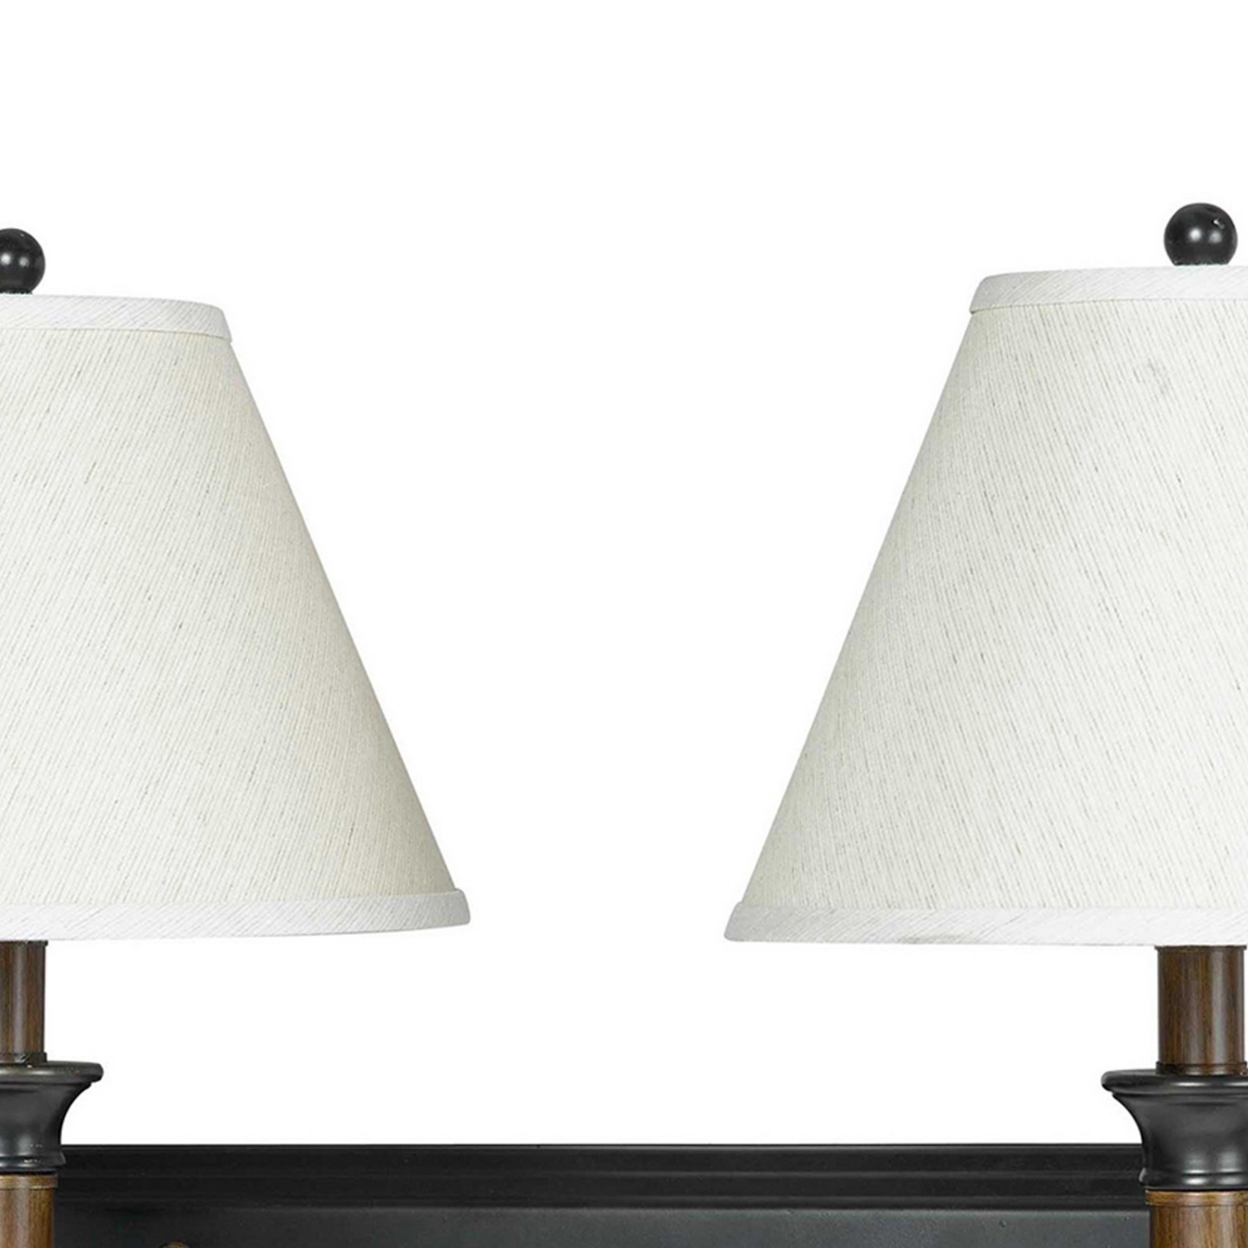 Metal Frame Dual Wall Lamps With Fabric Conical Shade, White And Brown- Saltoro Sherpi